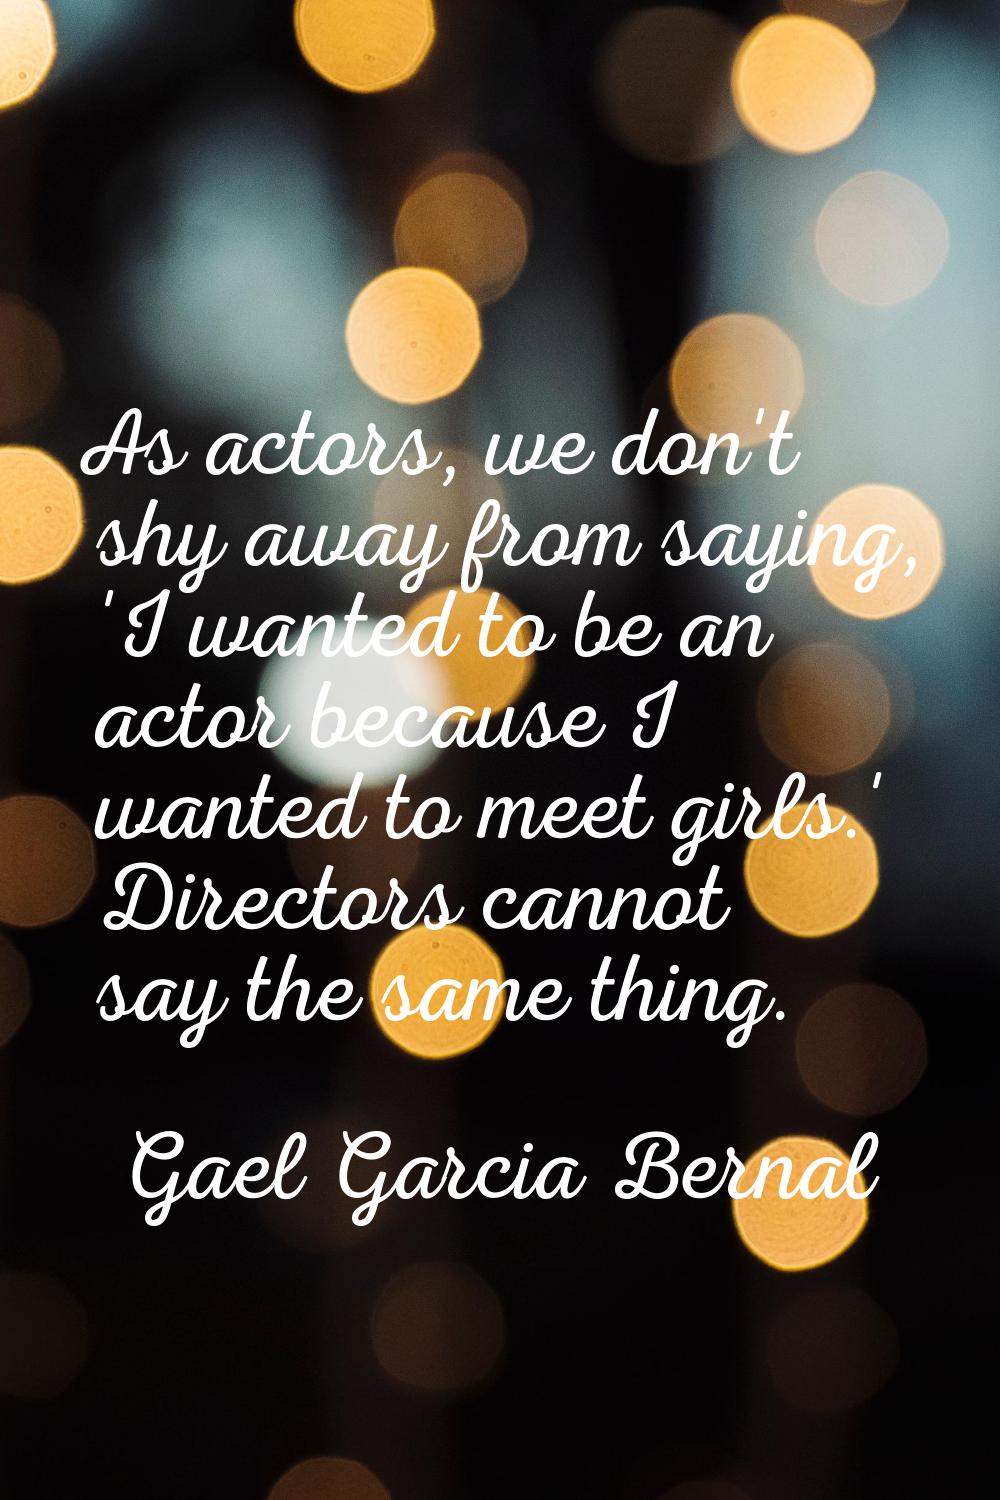 As actors, we don't shy away from saying, 'I wanted to be an actor because I wanted to meet girls.'